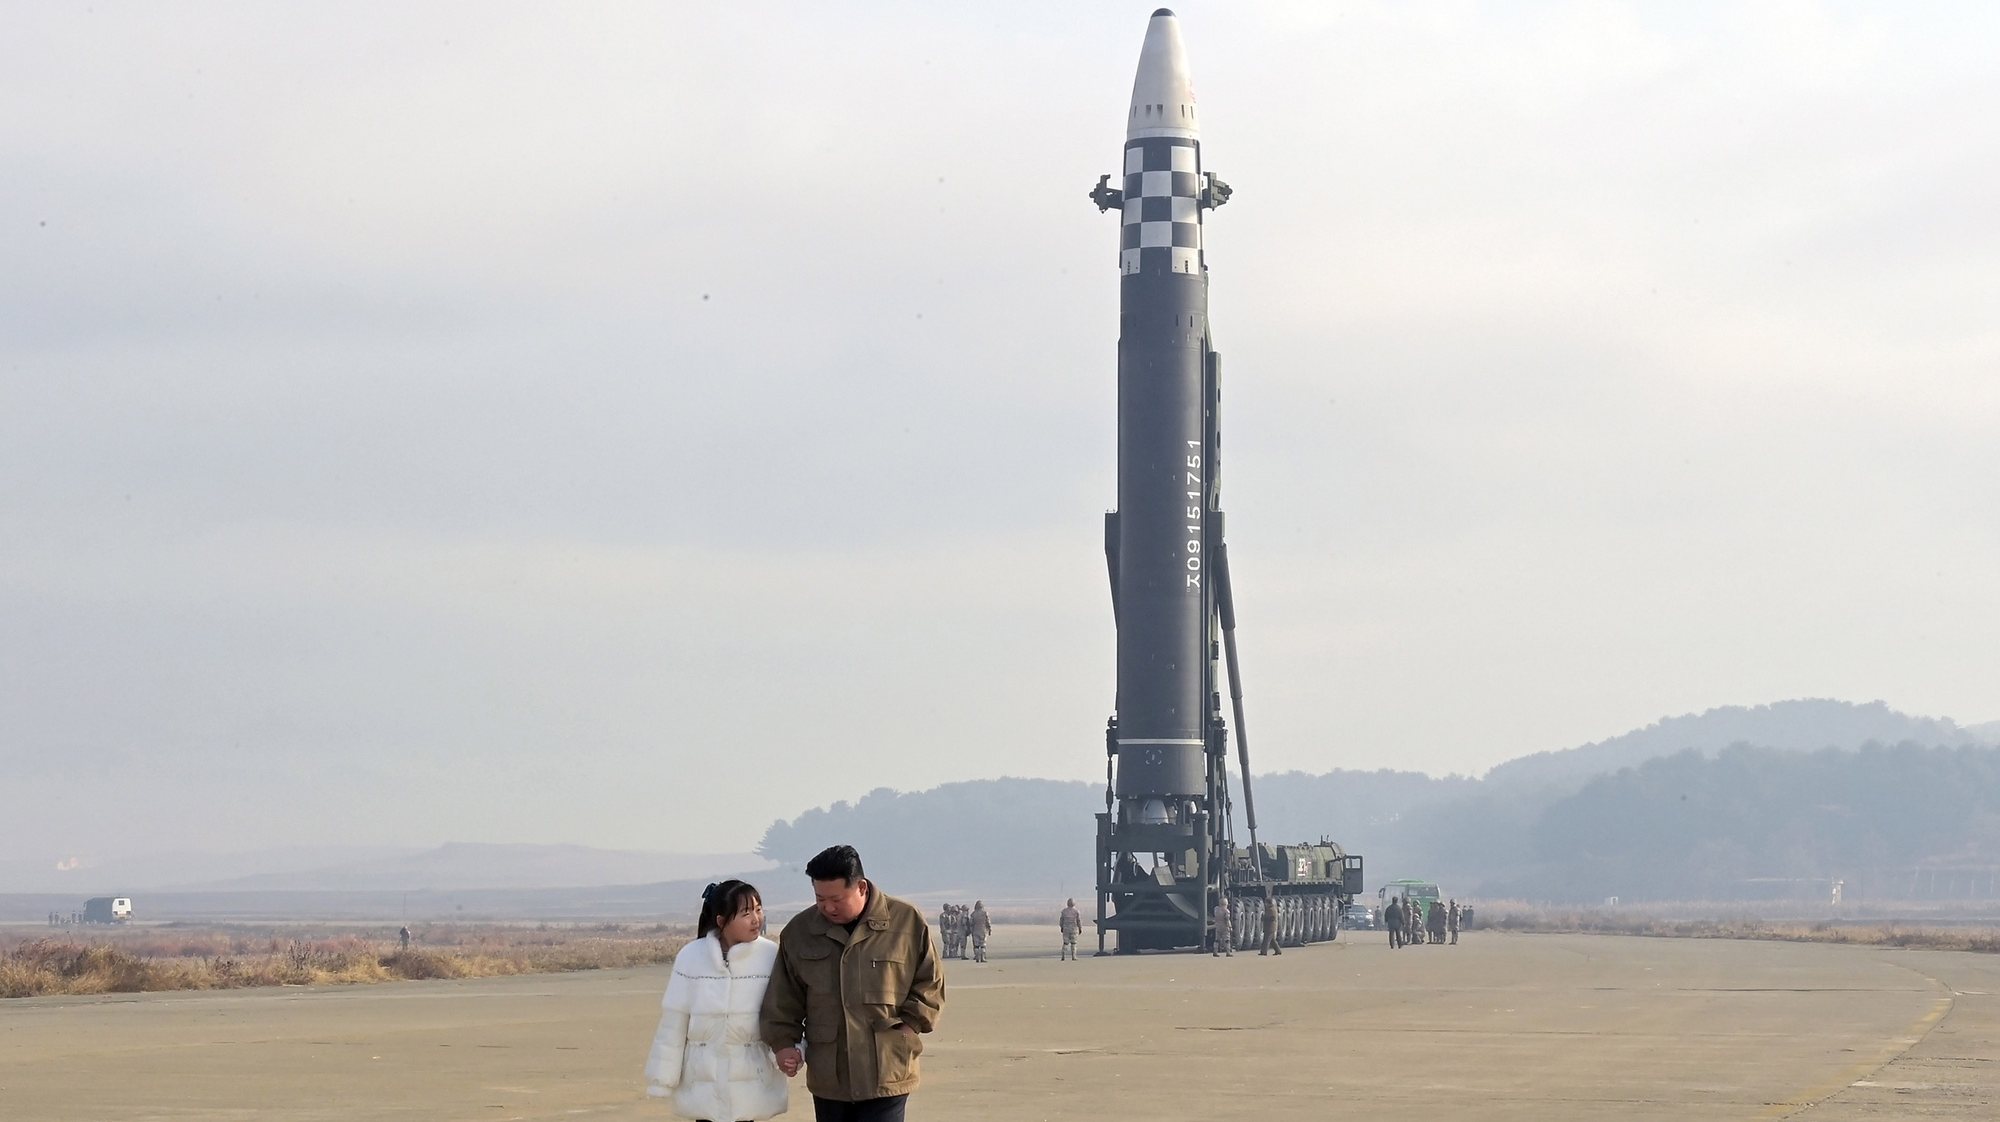 epa10313519 A photo released by the official North Korean Central News Agency (KCNA) shows North Korean leader Kim Jong-Un, accompanied by his daughter during the test firing of a new type of intercontinental ballistic missile (ICBM) Hwasongpho-17 at Pyongyang International airport in Pyongyang, North Korea, 18 November 2022 (Issued on 19 November 2022). According to KCNA, the missile traveled up to a maximum altitude of 6,040.9 kilometres and flew a distance of 999.2 kilometres for 4,135s before landing in open waters of the East Sea.

Thank you  EPA/KCNA   EDITORIAL USE ONLY